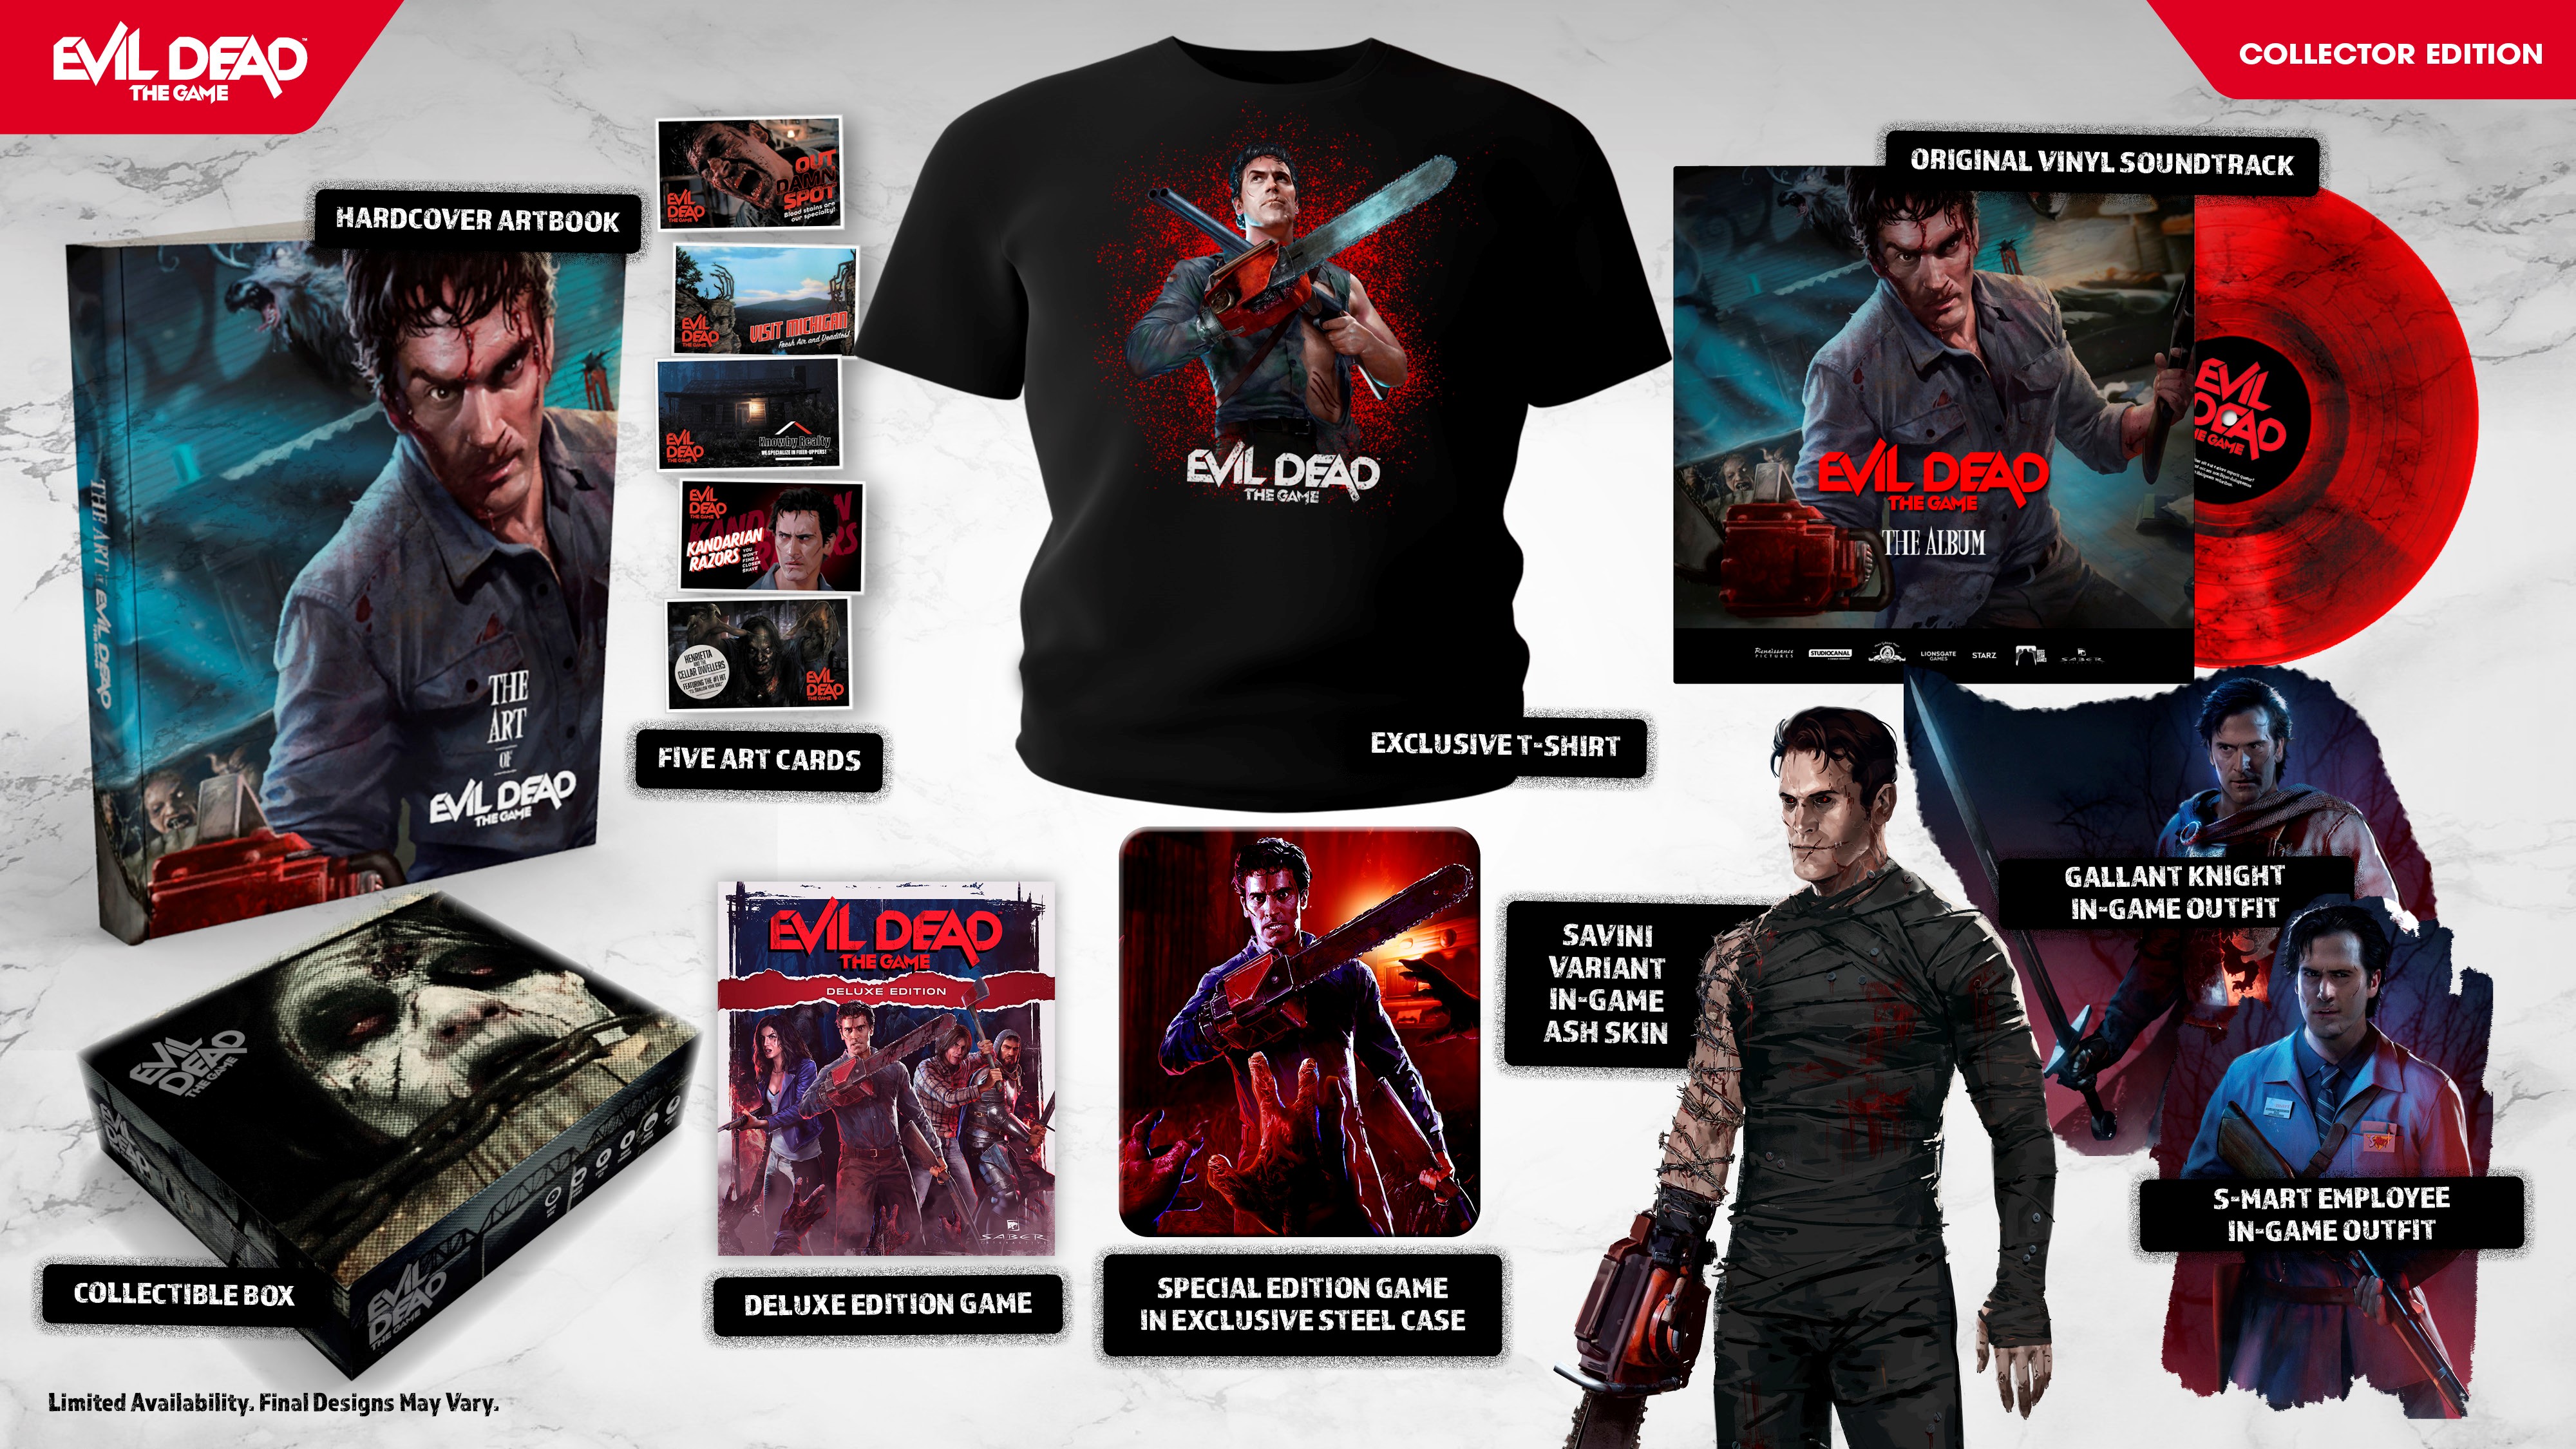 Evil Dead: The Game Collector's Edition